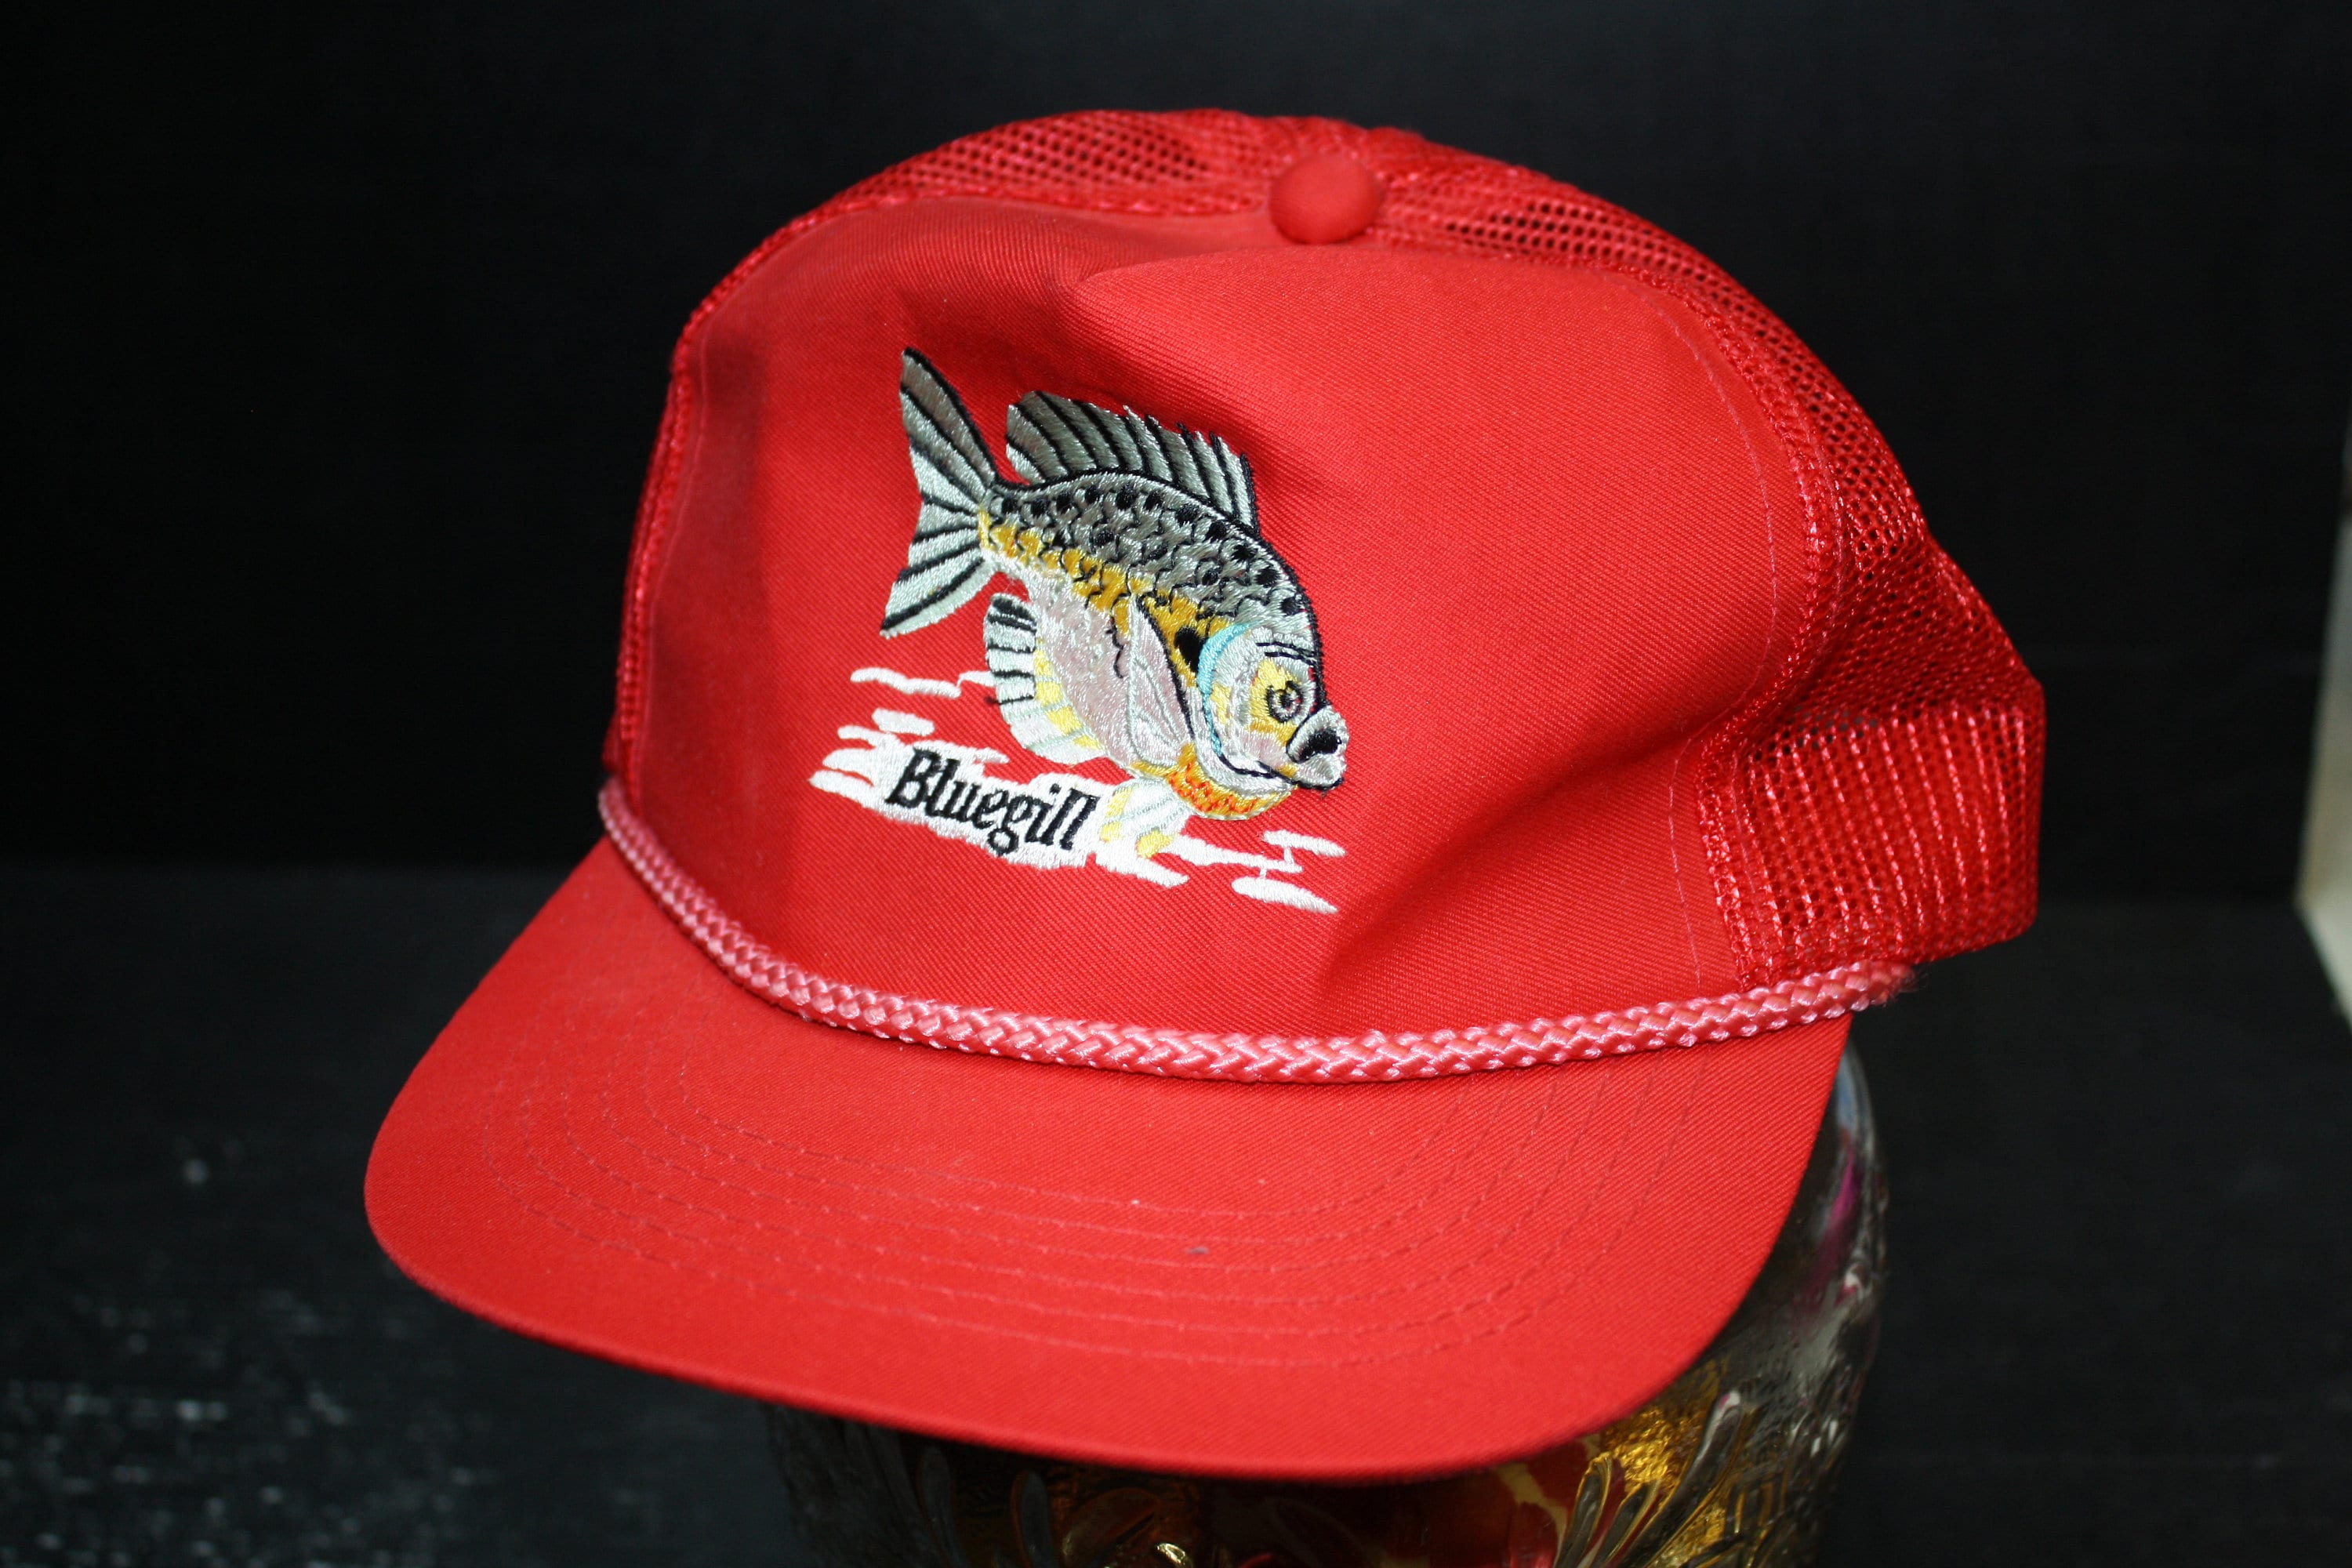 Vintage Red Color 'bluegill' Mesh Back Fishing Cap Byh Youngfin